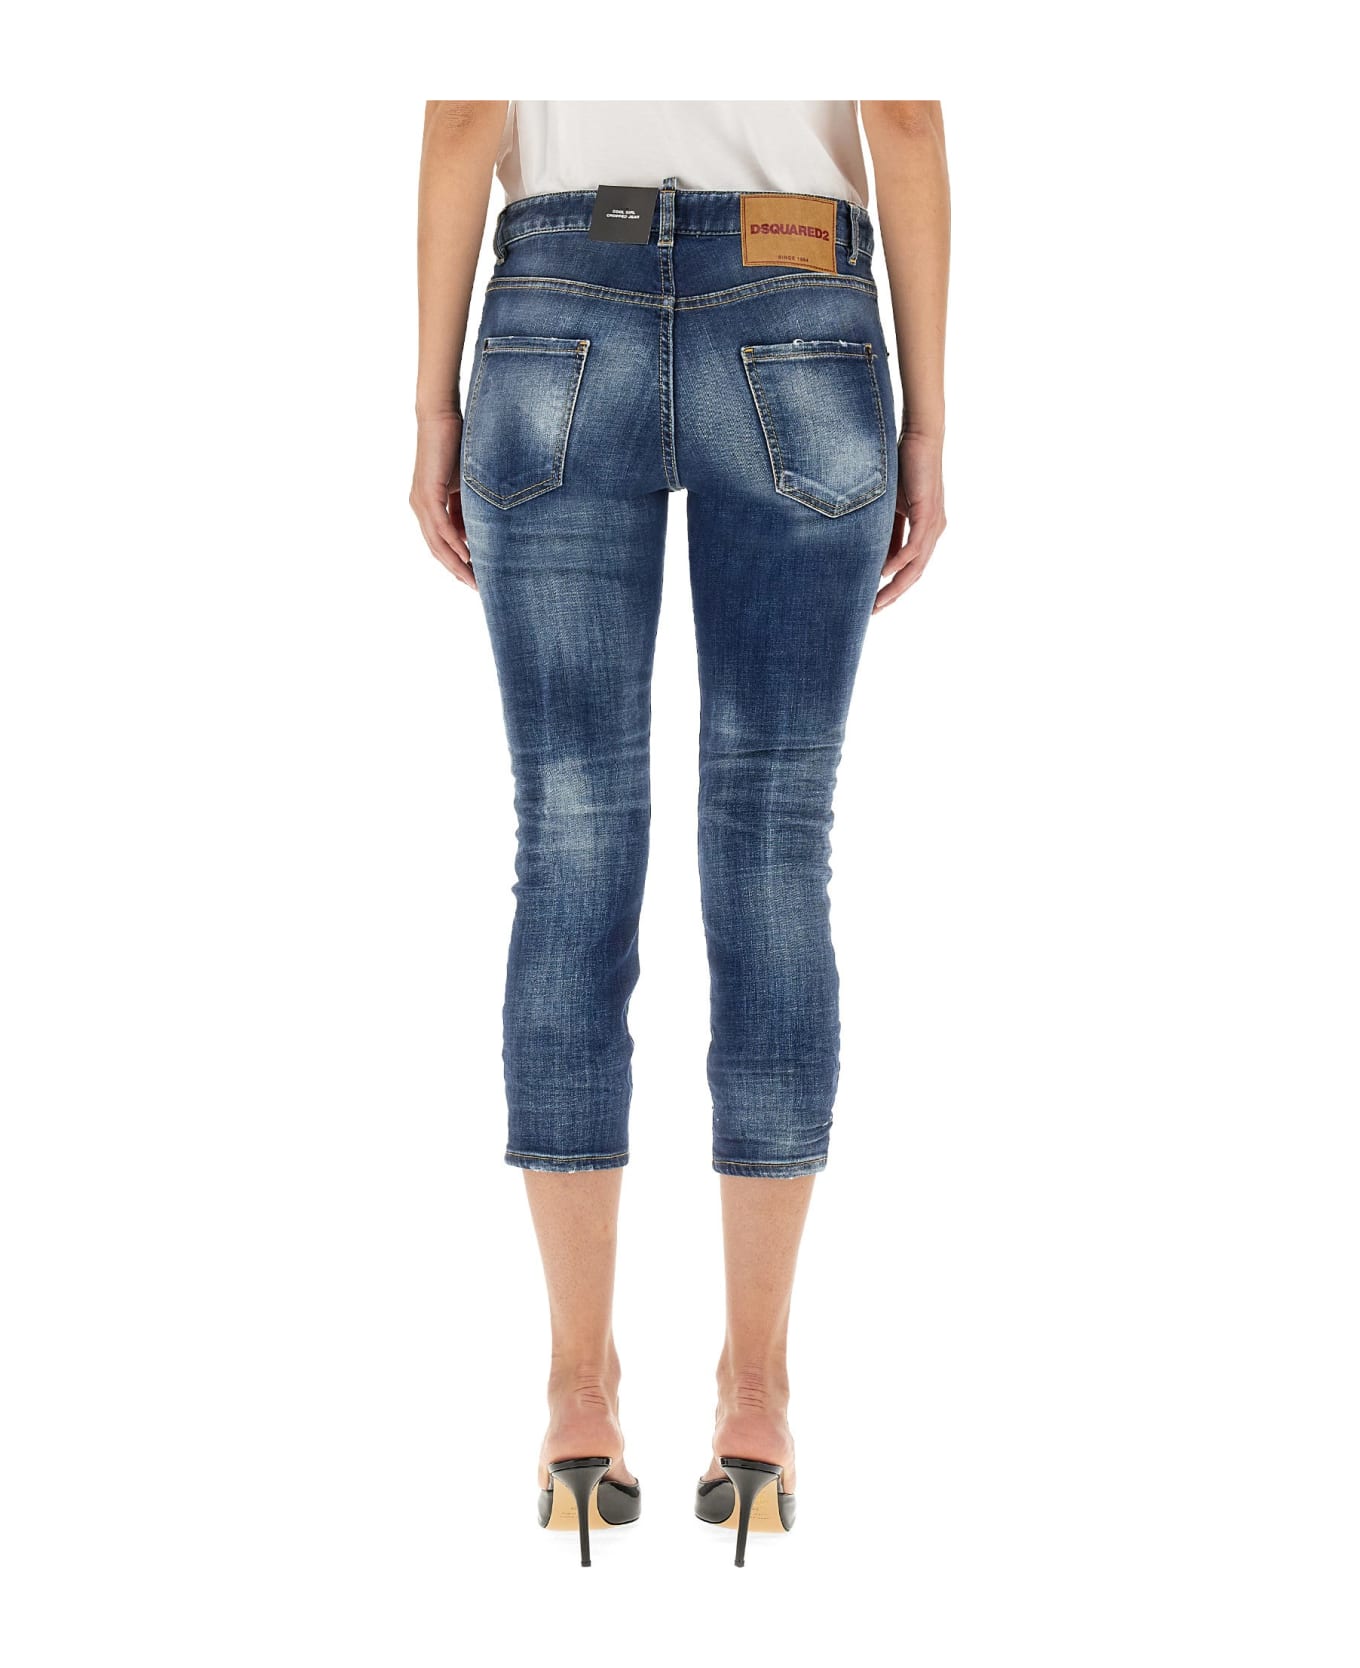 Dsquared2 Cool Girl Cropped Jeans - Blu デニム